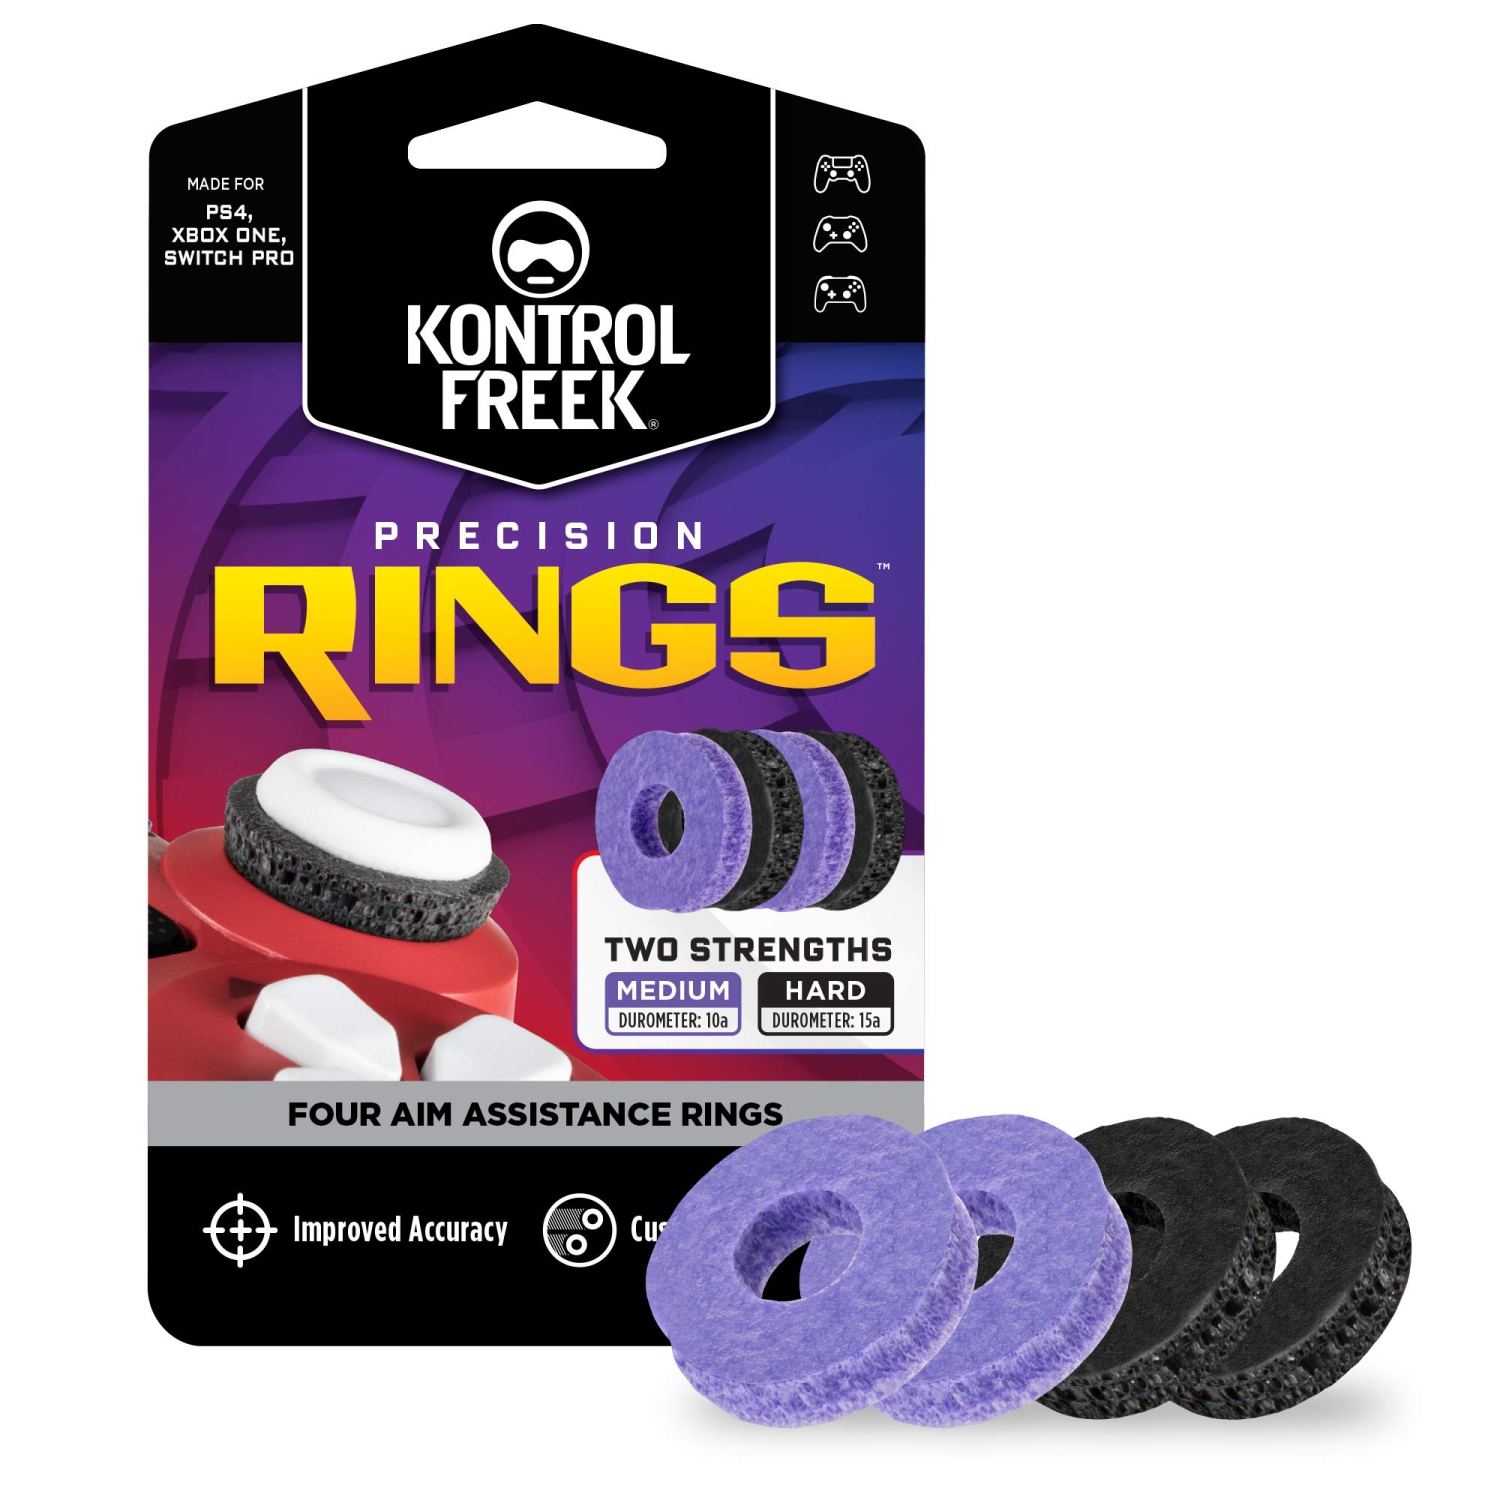 KontrolFreek Precision Rings | Aim Assist Motion Control for PlayStation 4 (PS4), PlayStation 5 (PS5), Xbox One, Xbox Series